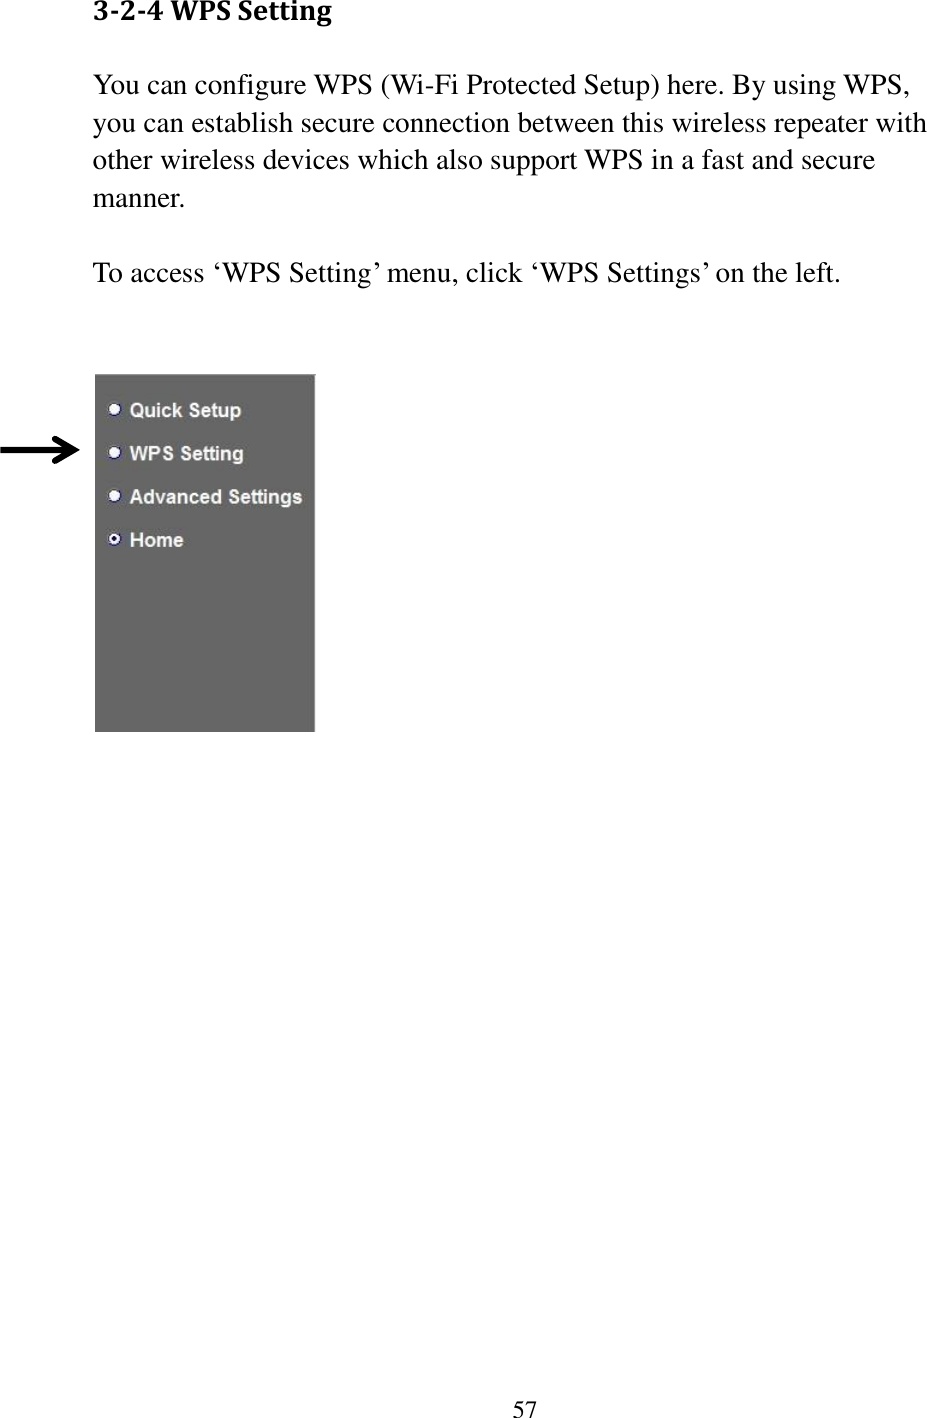 57  3-2-4 WPS Setting You can configure WPS (Wi-Fi Protected Setup) here. By using WPS, you can establish secure connection between this wireless repeater with other wireless devices which also support WPS in a fast and secure manner.  To access „WPS Setting‟ menu, click „WPS Settings‟ on the left.       